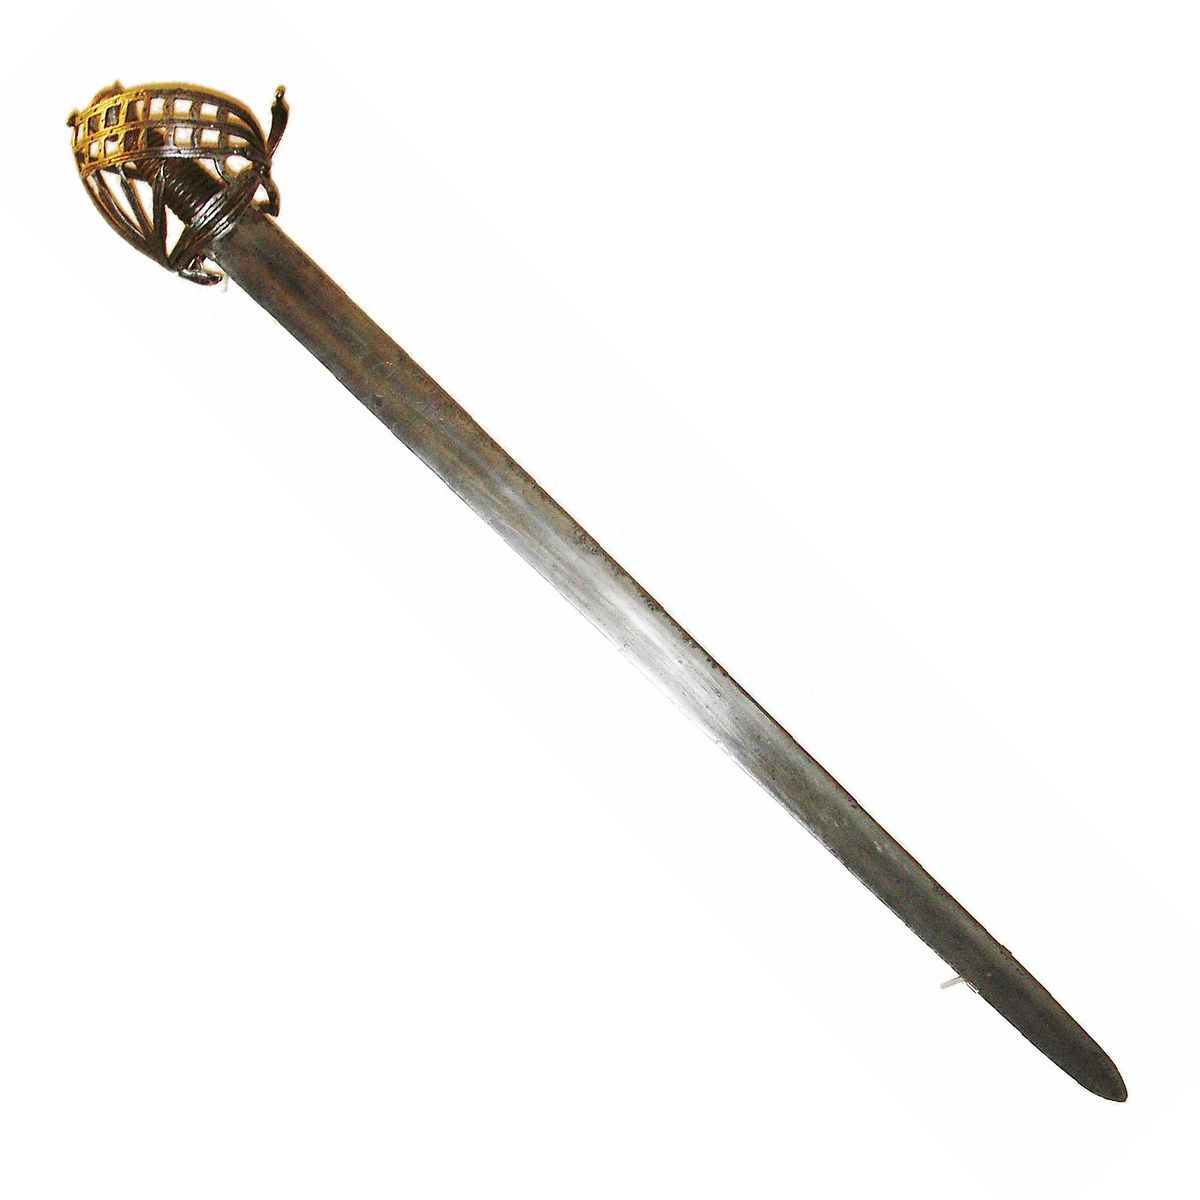 Images of Sword & Weapon | 1200x1200